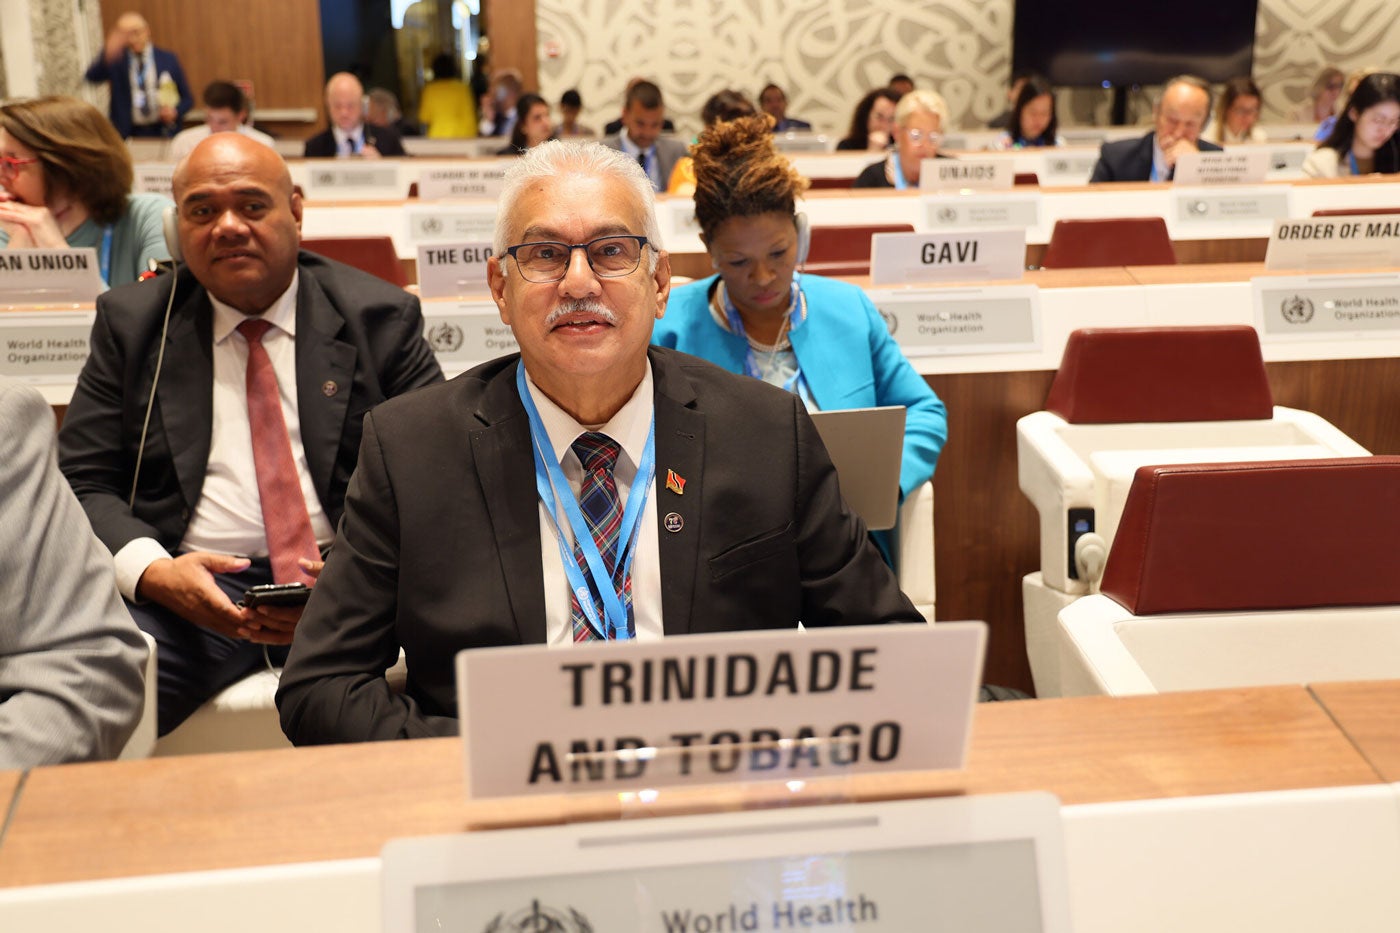  Minister of Health of Trinidad and Tobago, Terrence Deyalsingh